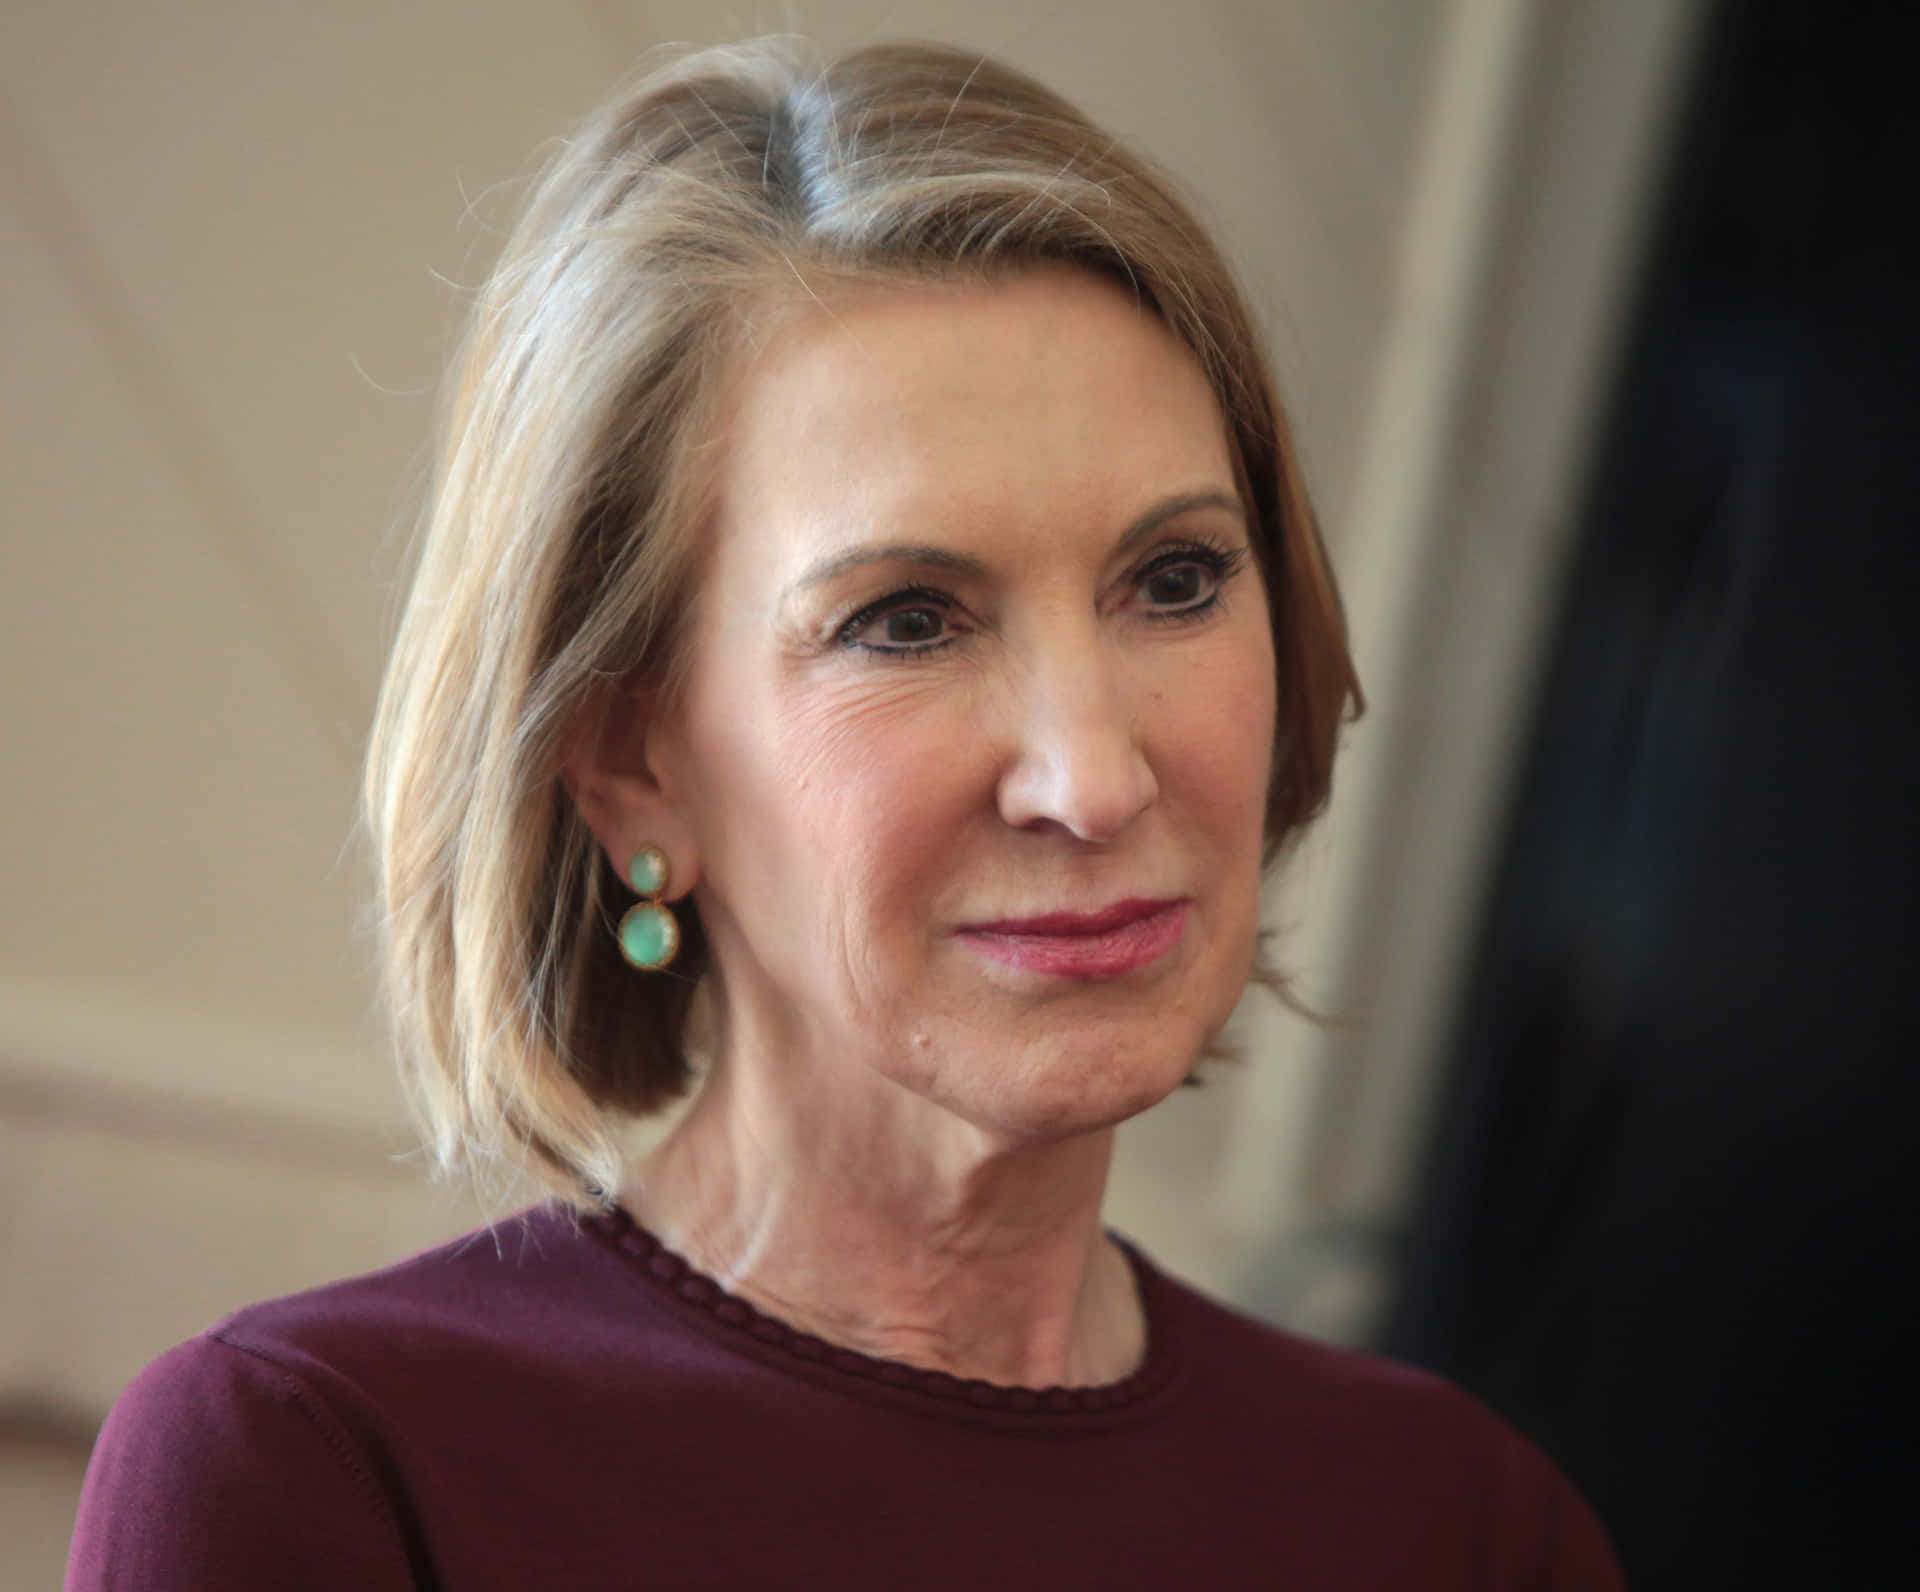 Carly Fiorina With Green Earrings Picture